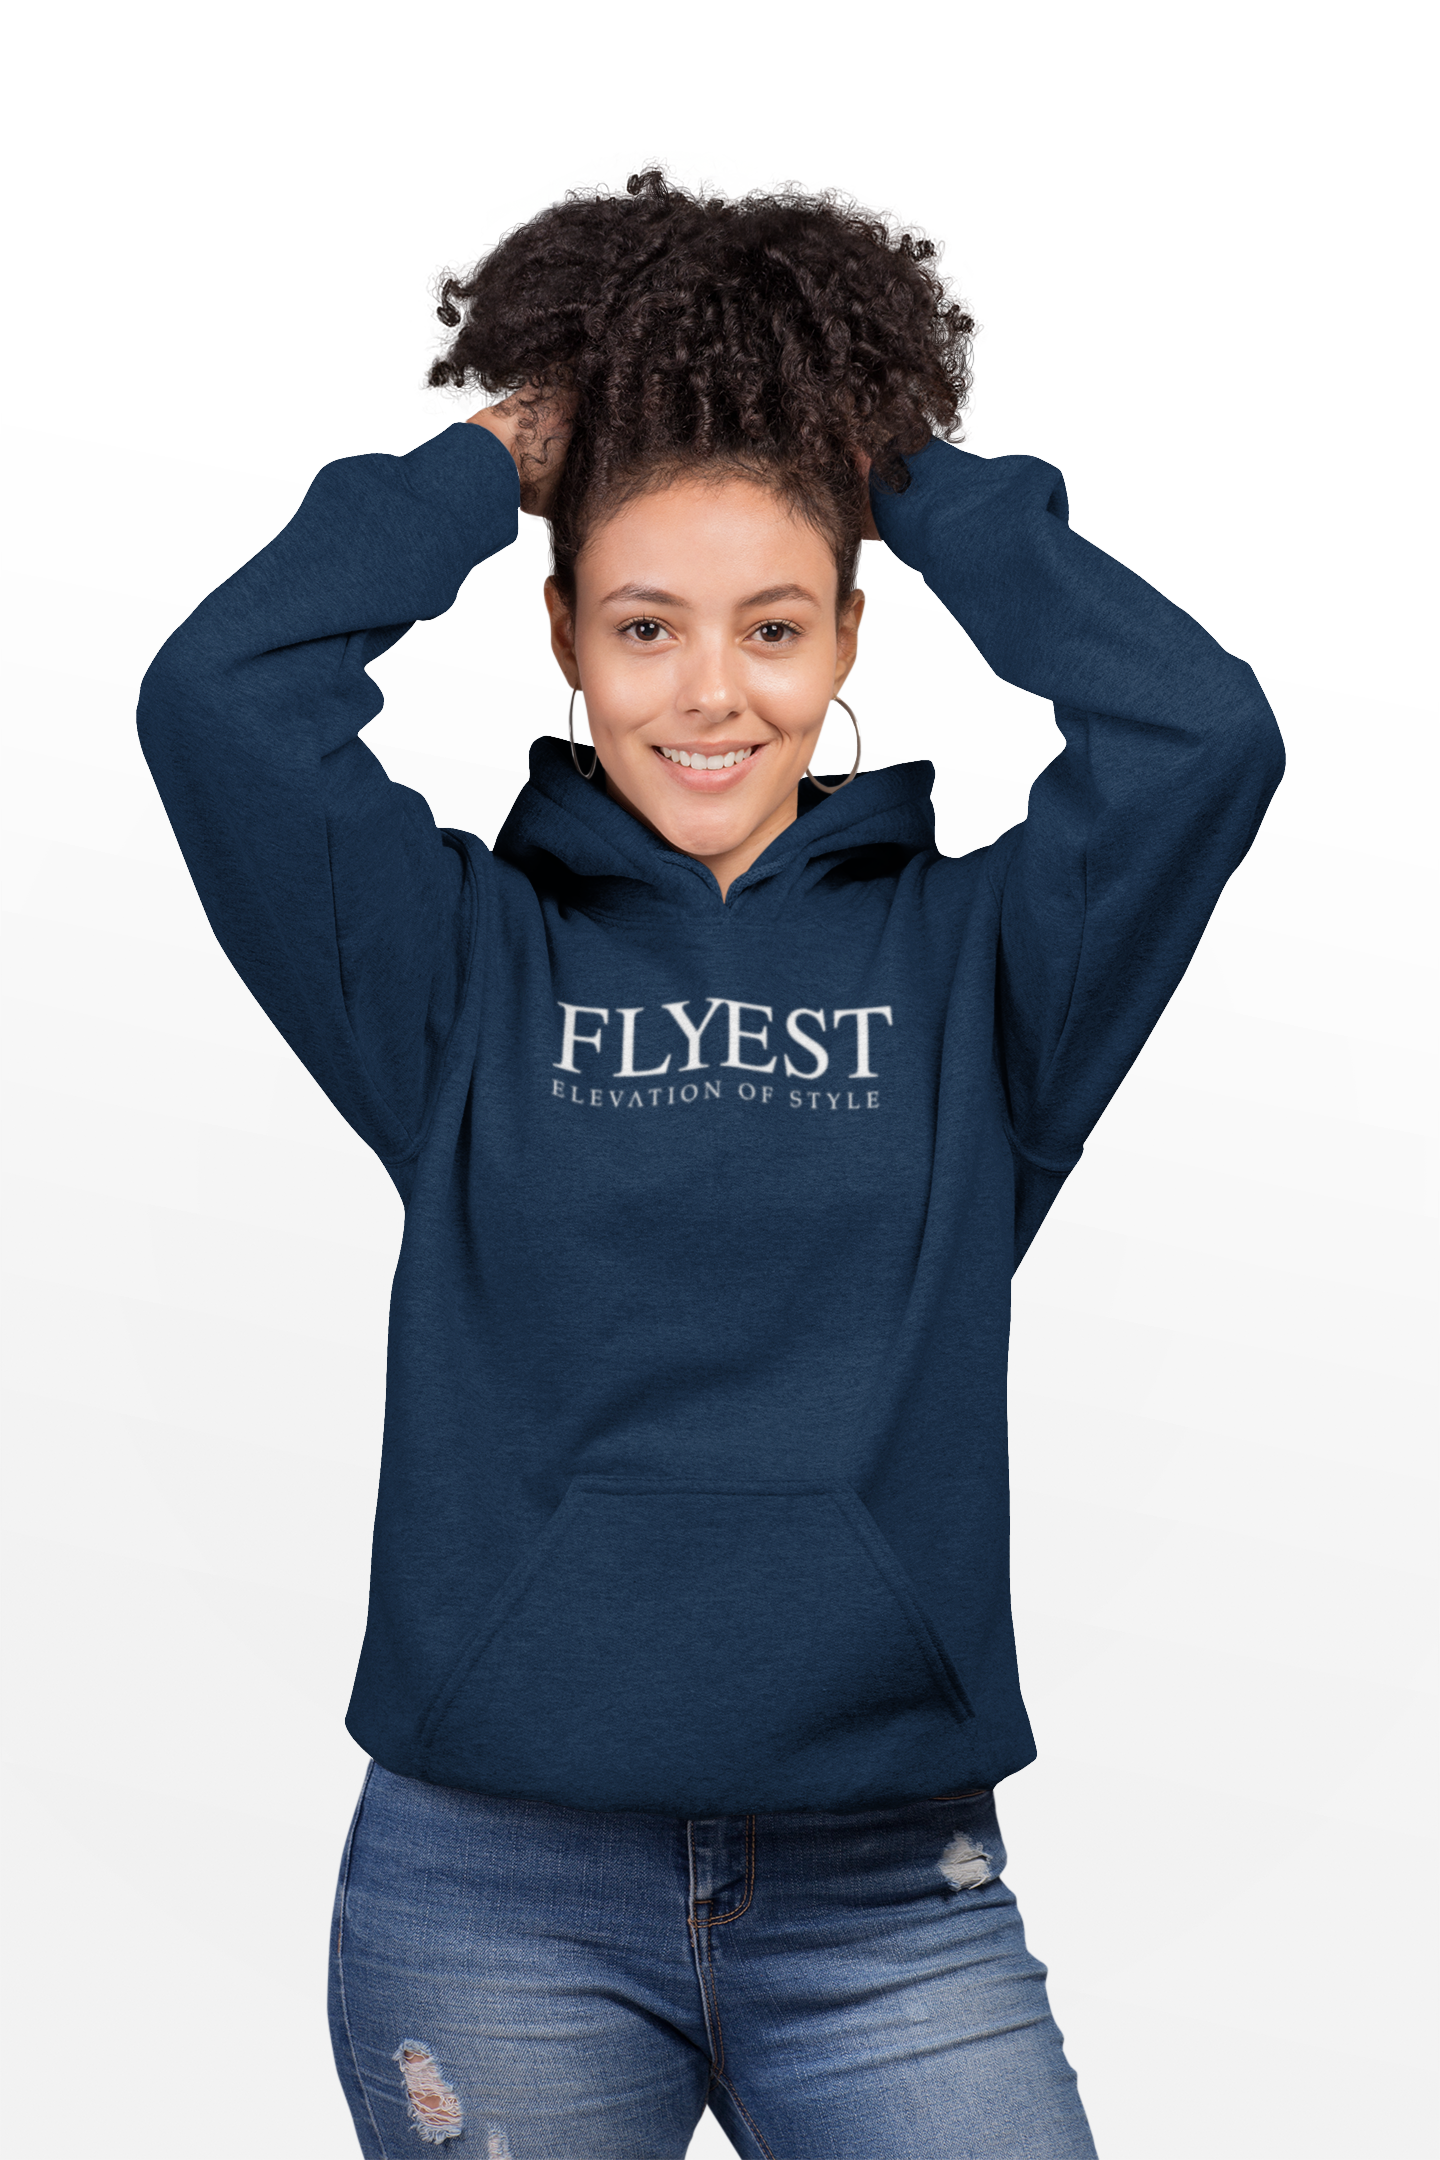 Flyest Elevation of Style Women's Hoodie